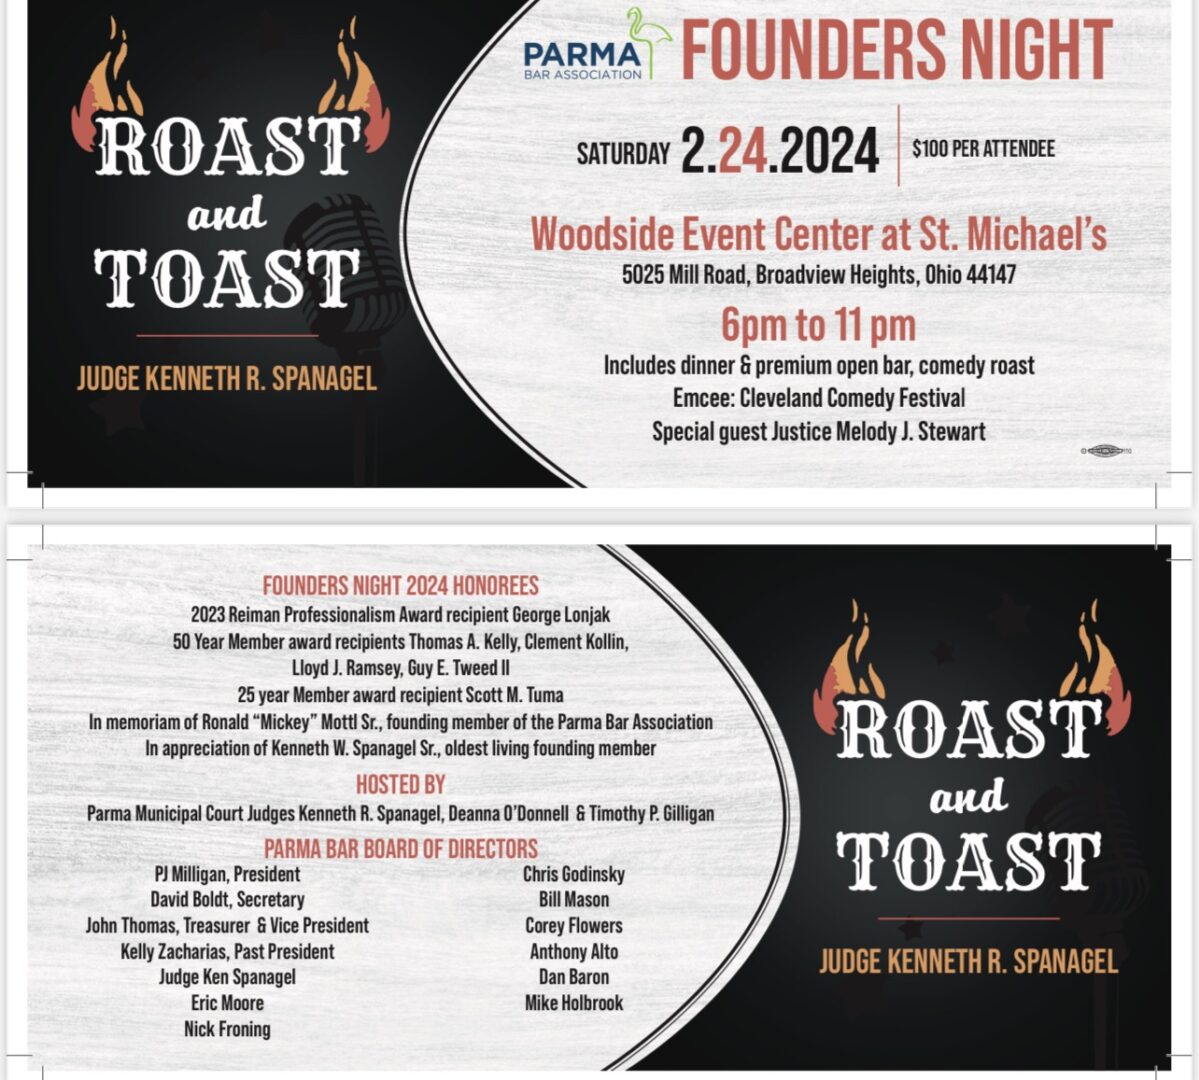 A roast and toast event flyer with some type of roast.